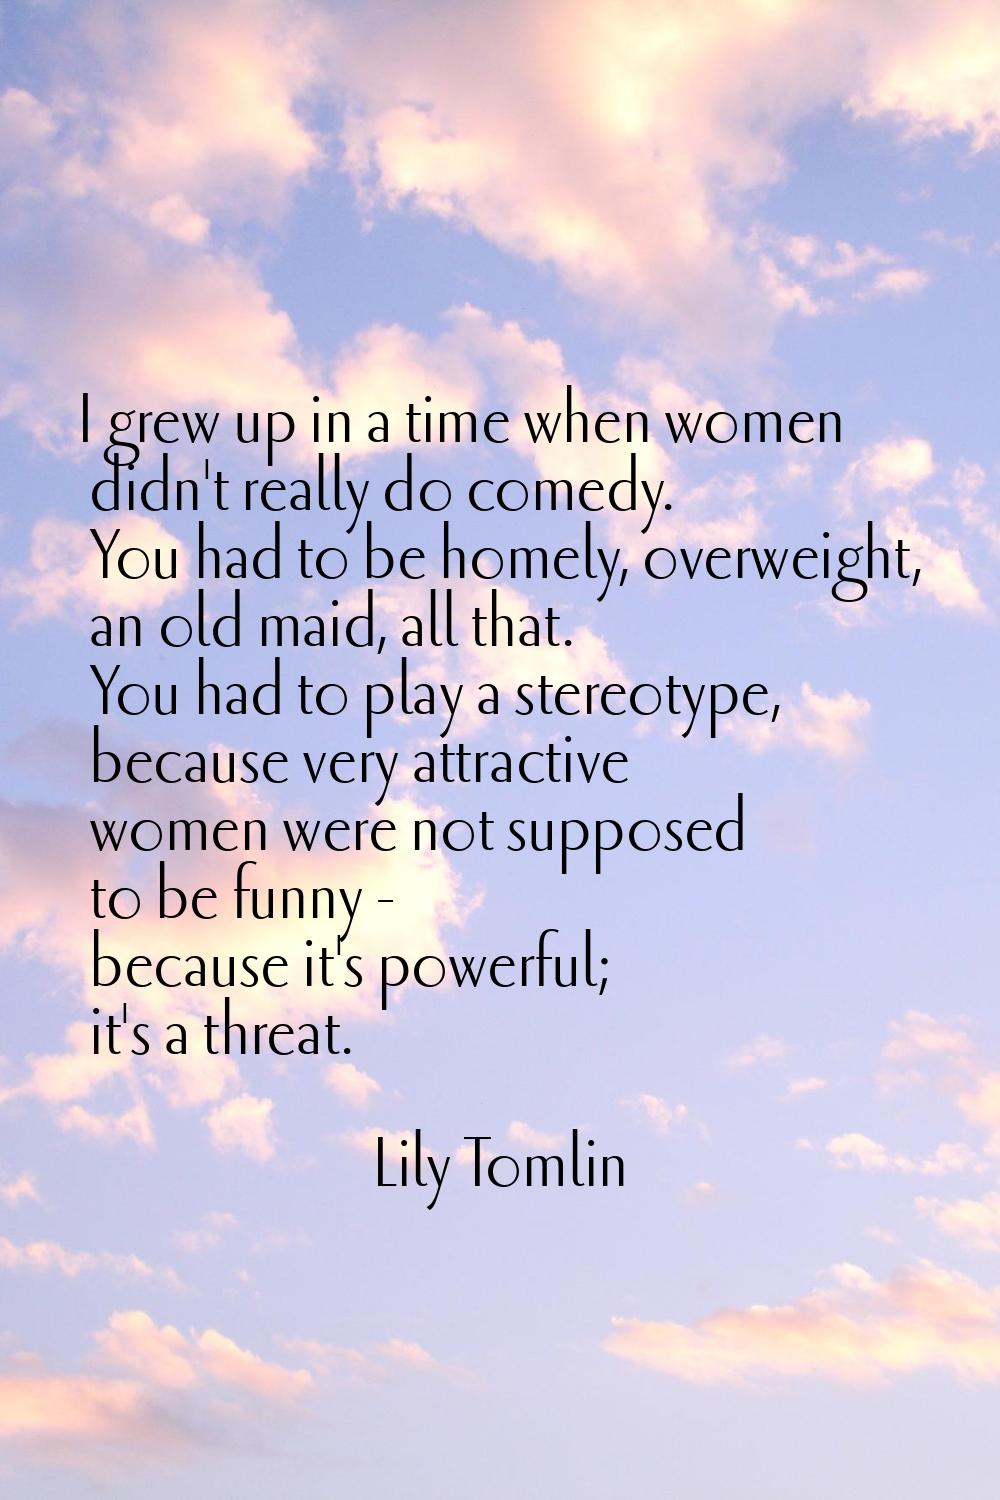 I grew up in a time when women didn't really do comedy. You had to be homely, overweight, an old ma